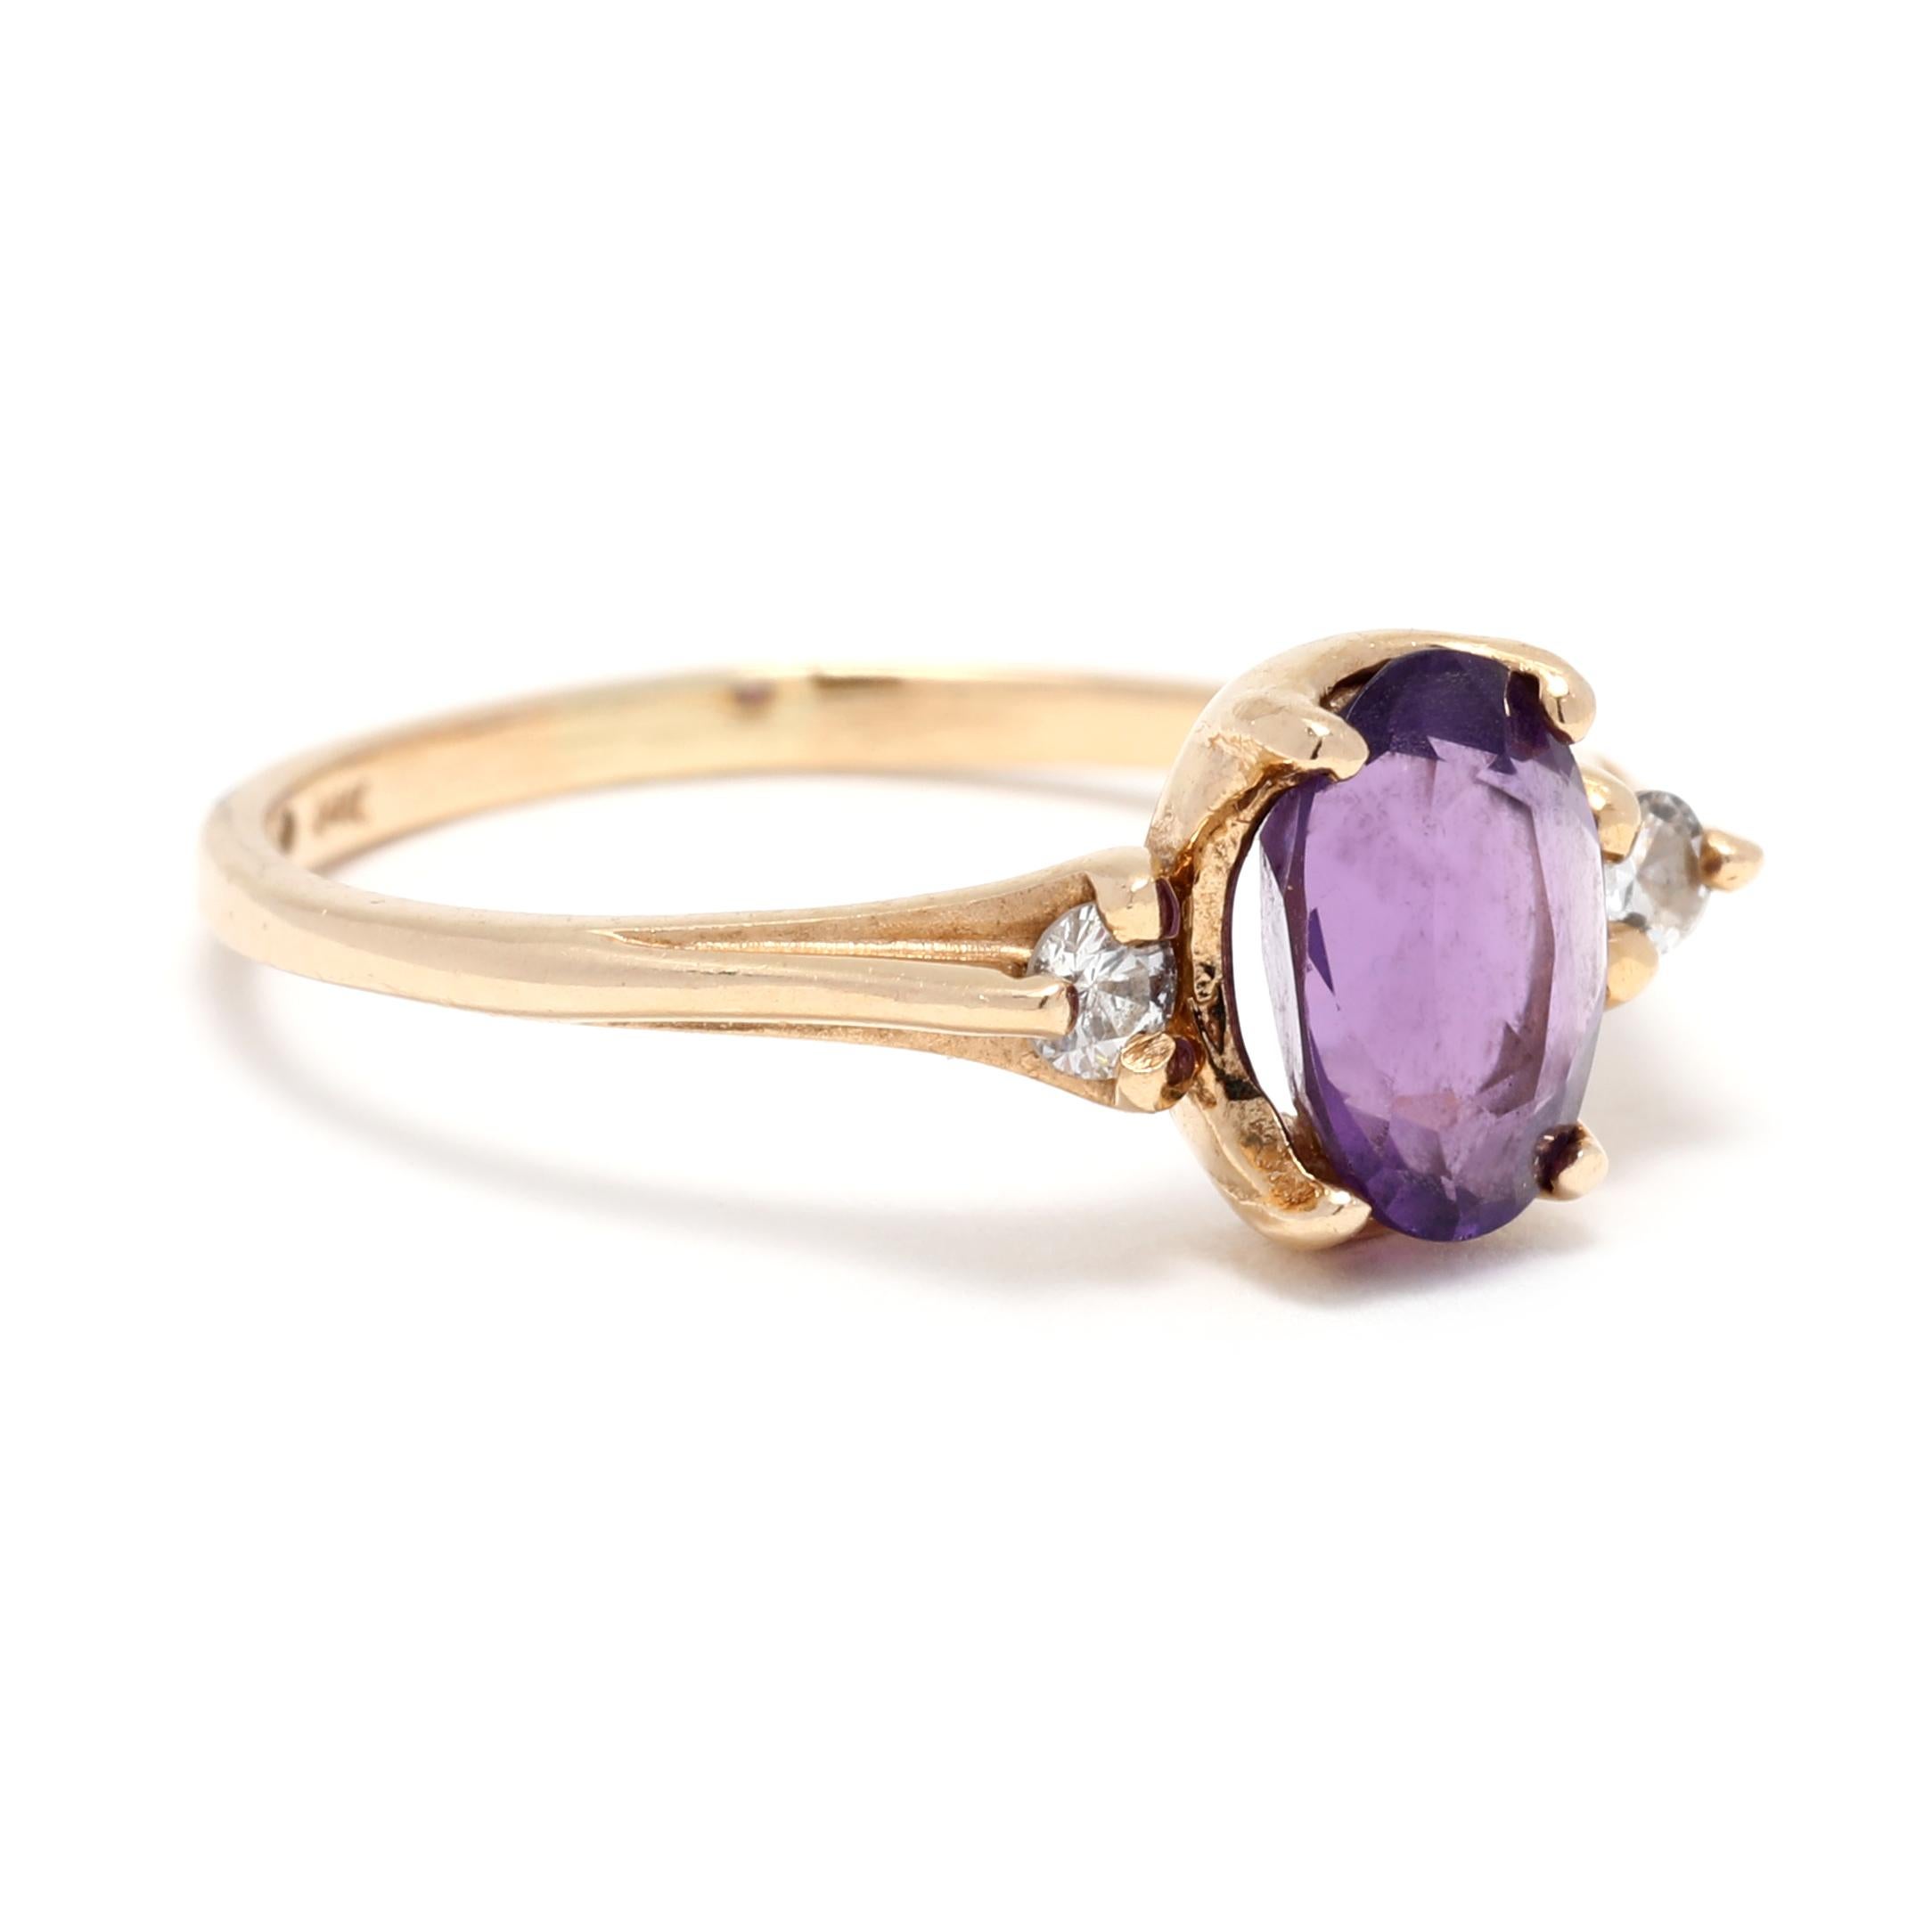 This romantic 0.76ctw Amethyst Diamond Three Stone Ring will make a unique, beautiful addition to your jewelry collection. Expertly crafted from 14K Yellow Gold, this exquisite ring features a stunning oval Amethyst center stone flanked by two